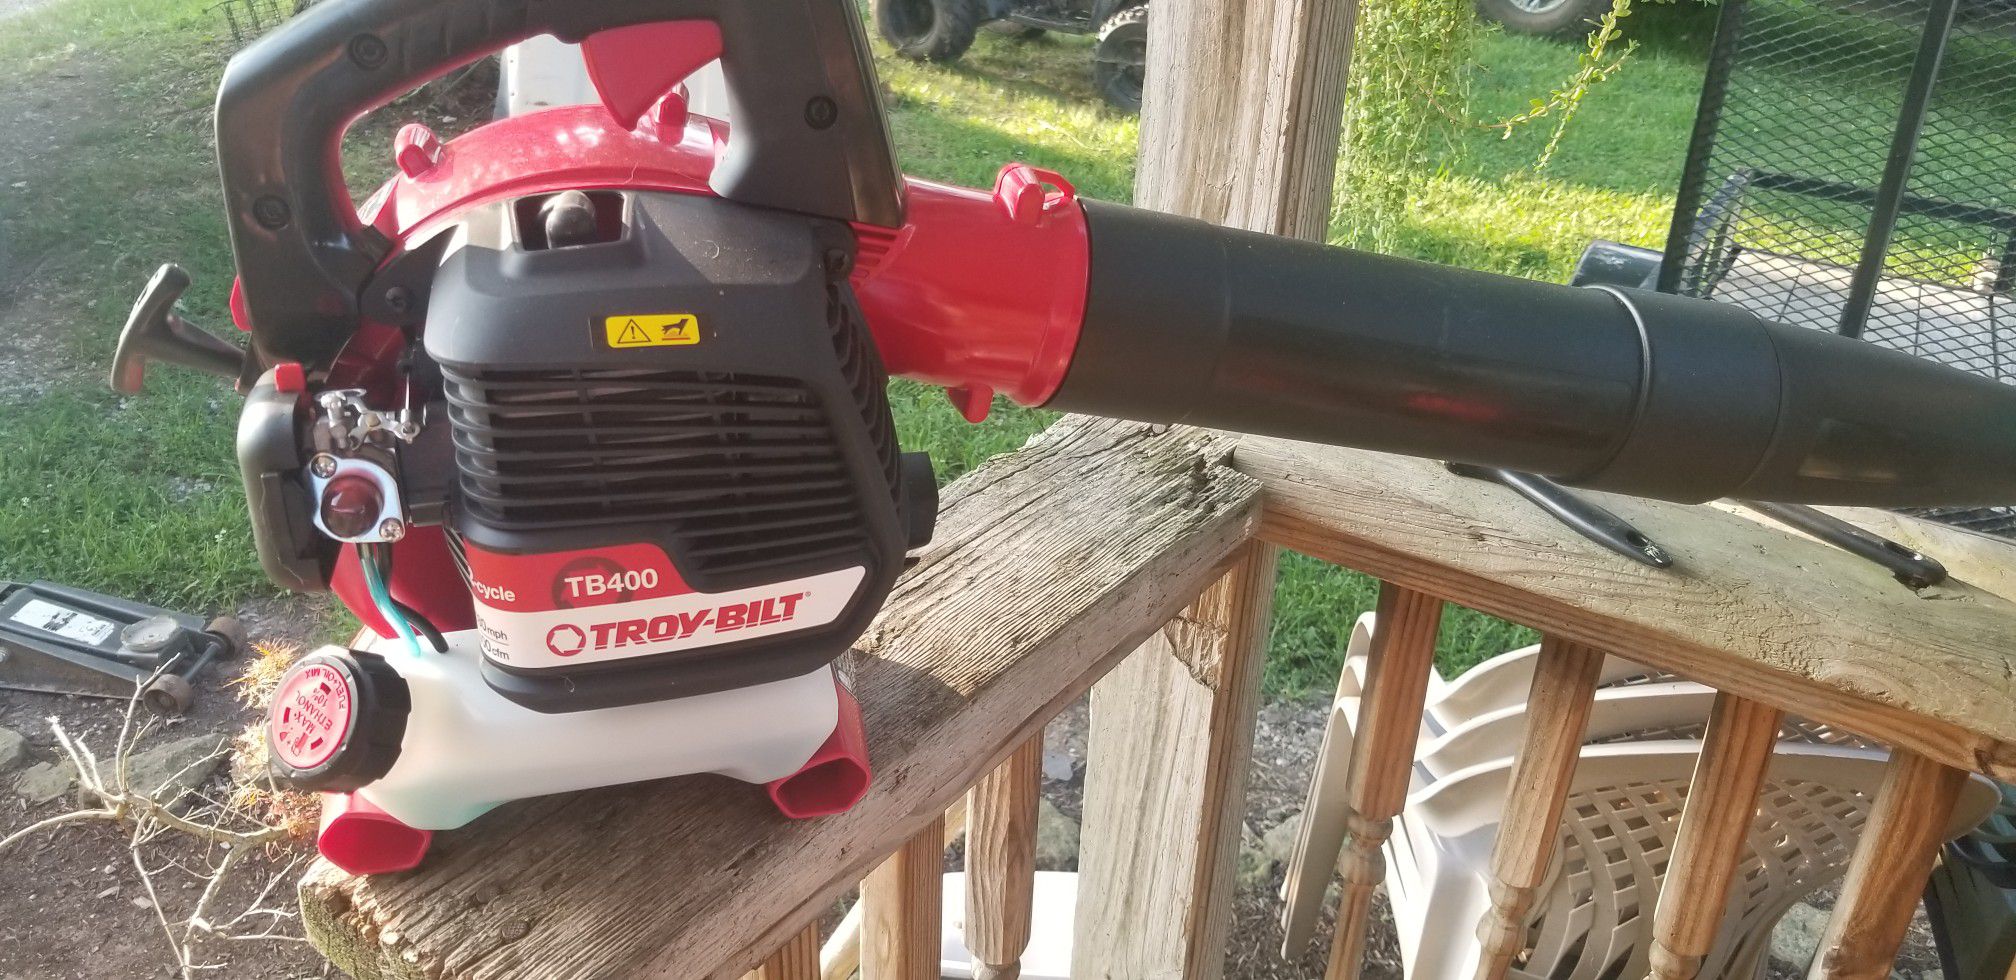 New troy built blower